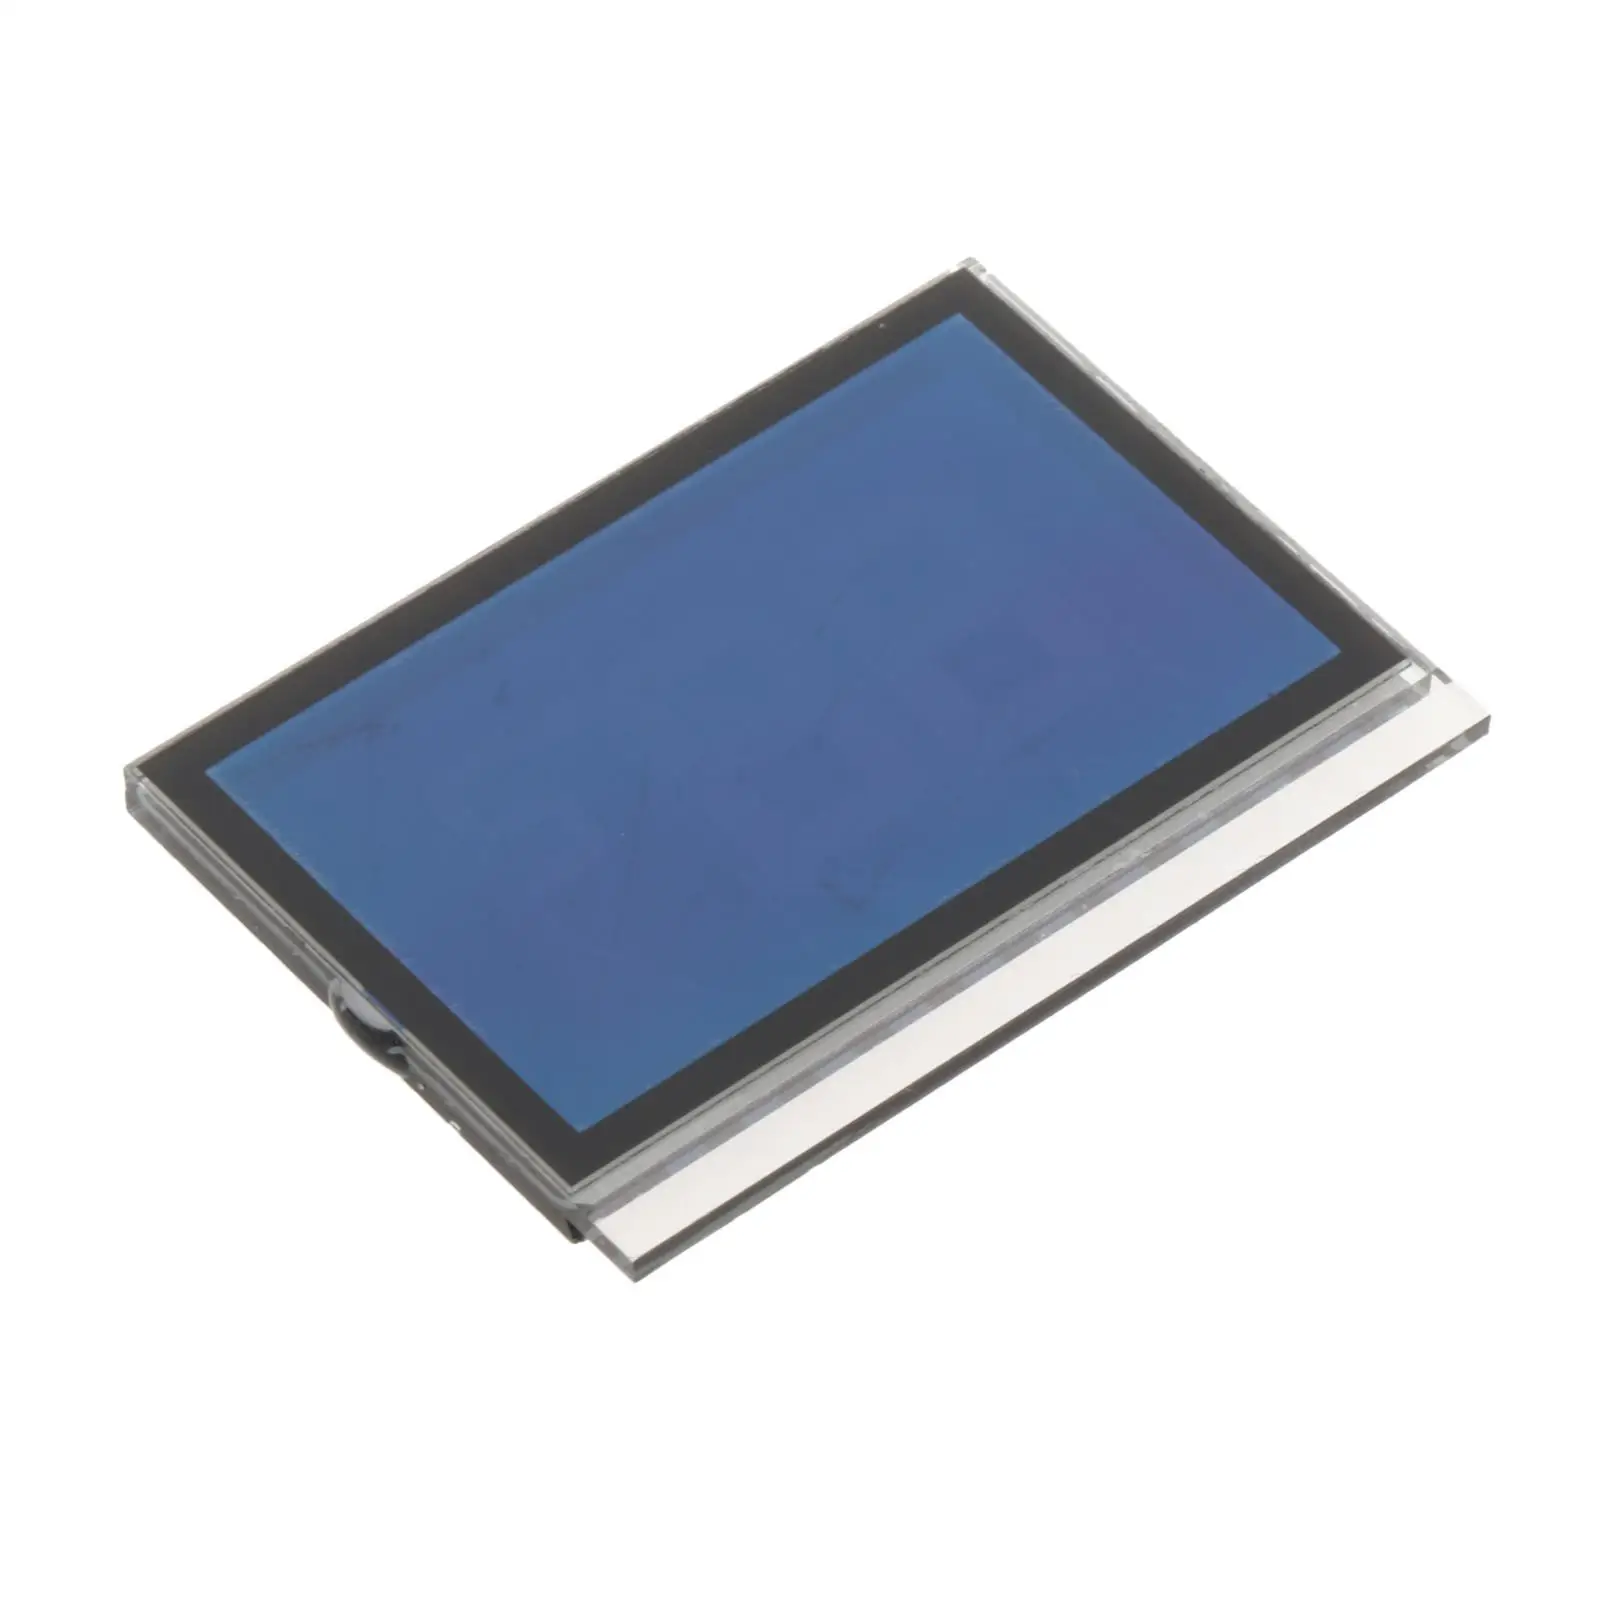 Car LCD Display Screen Panel Fit for 308 308cc 408 Accessories